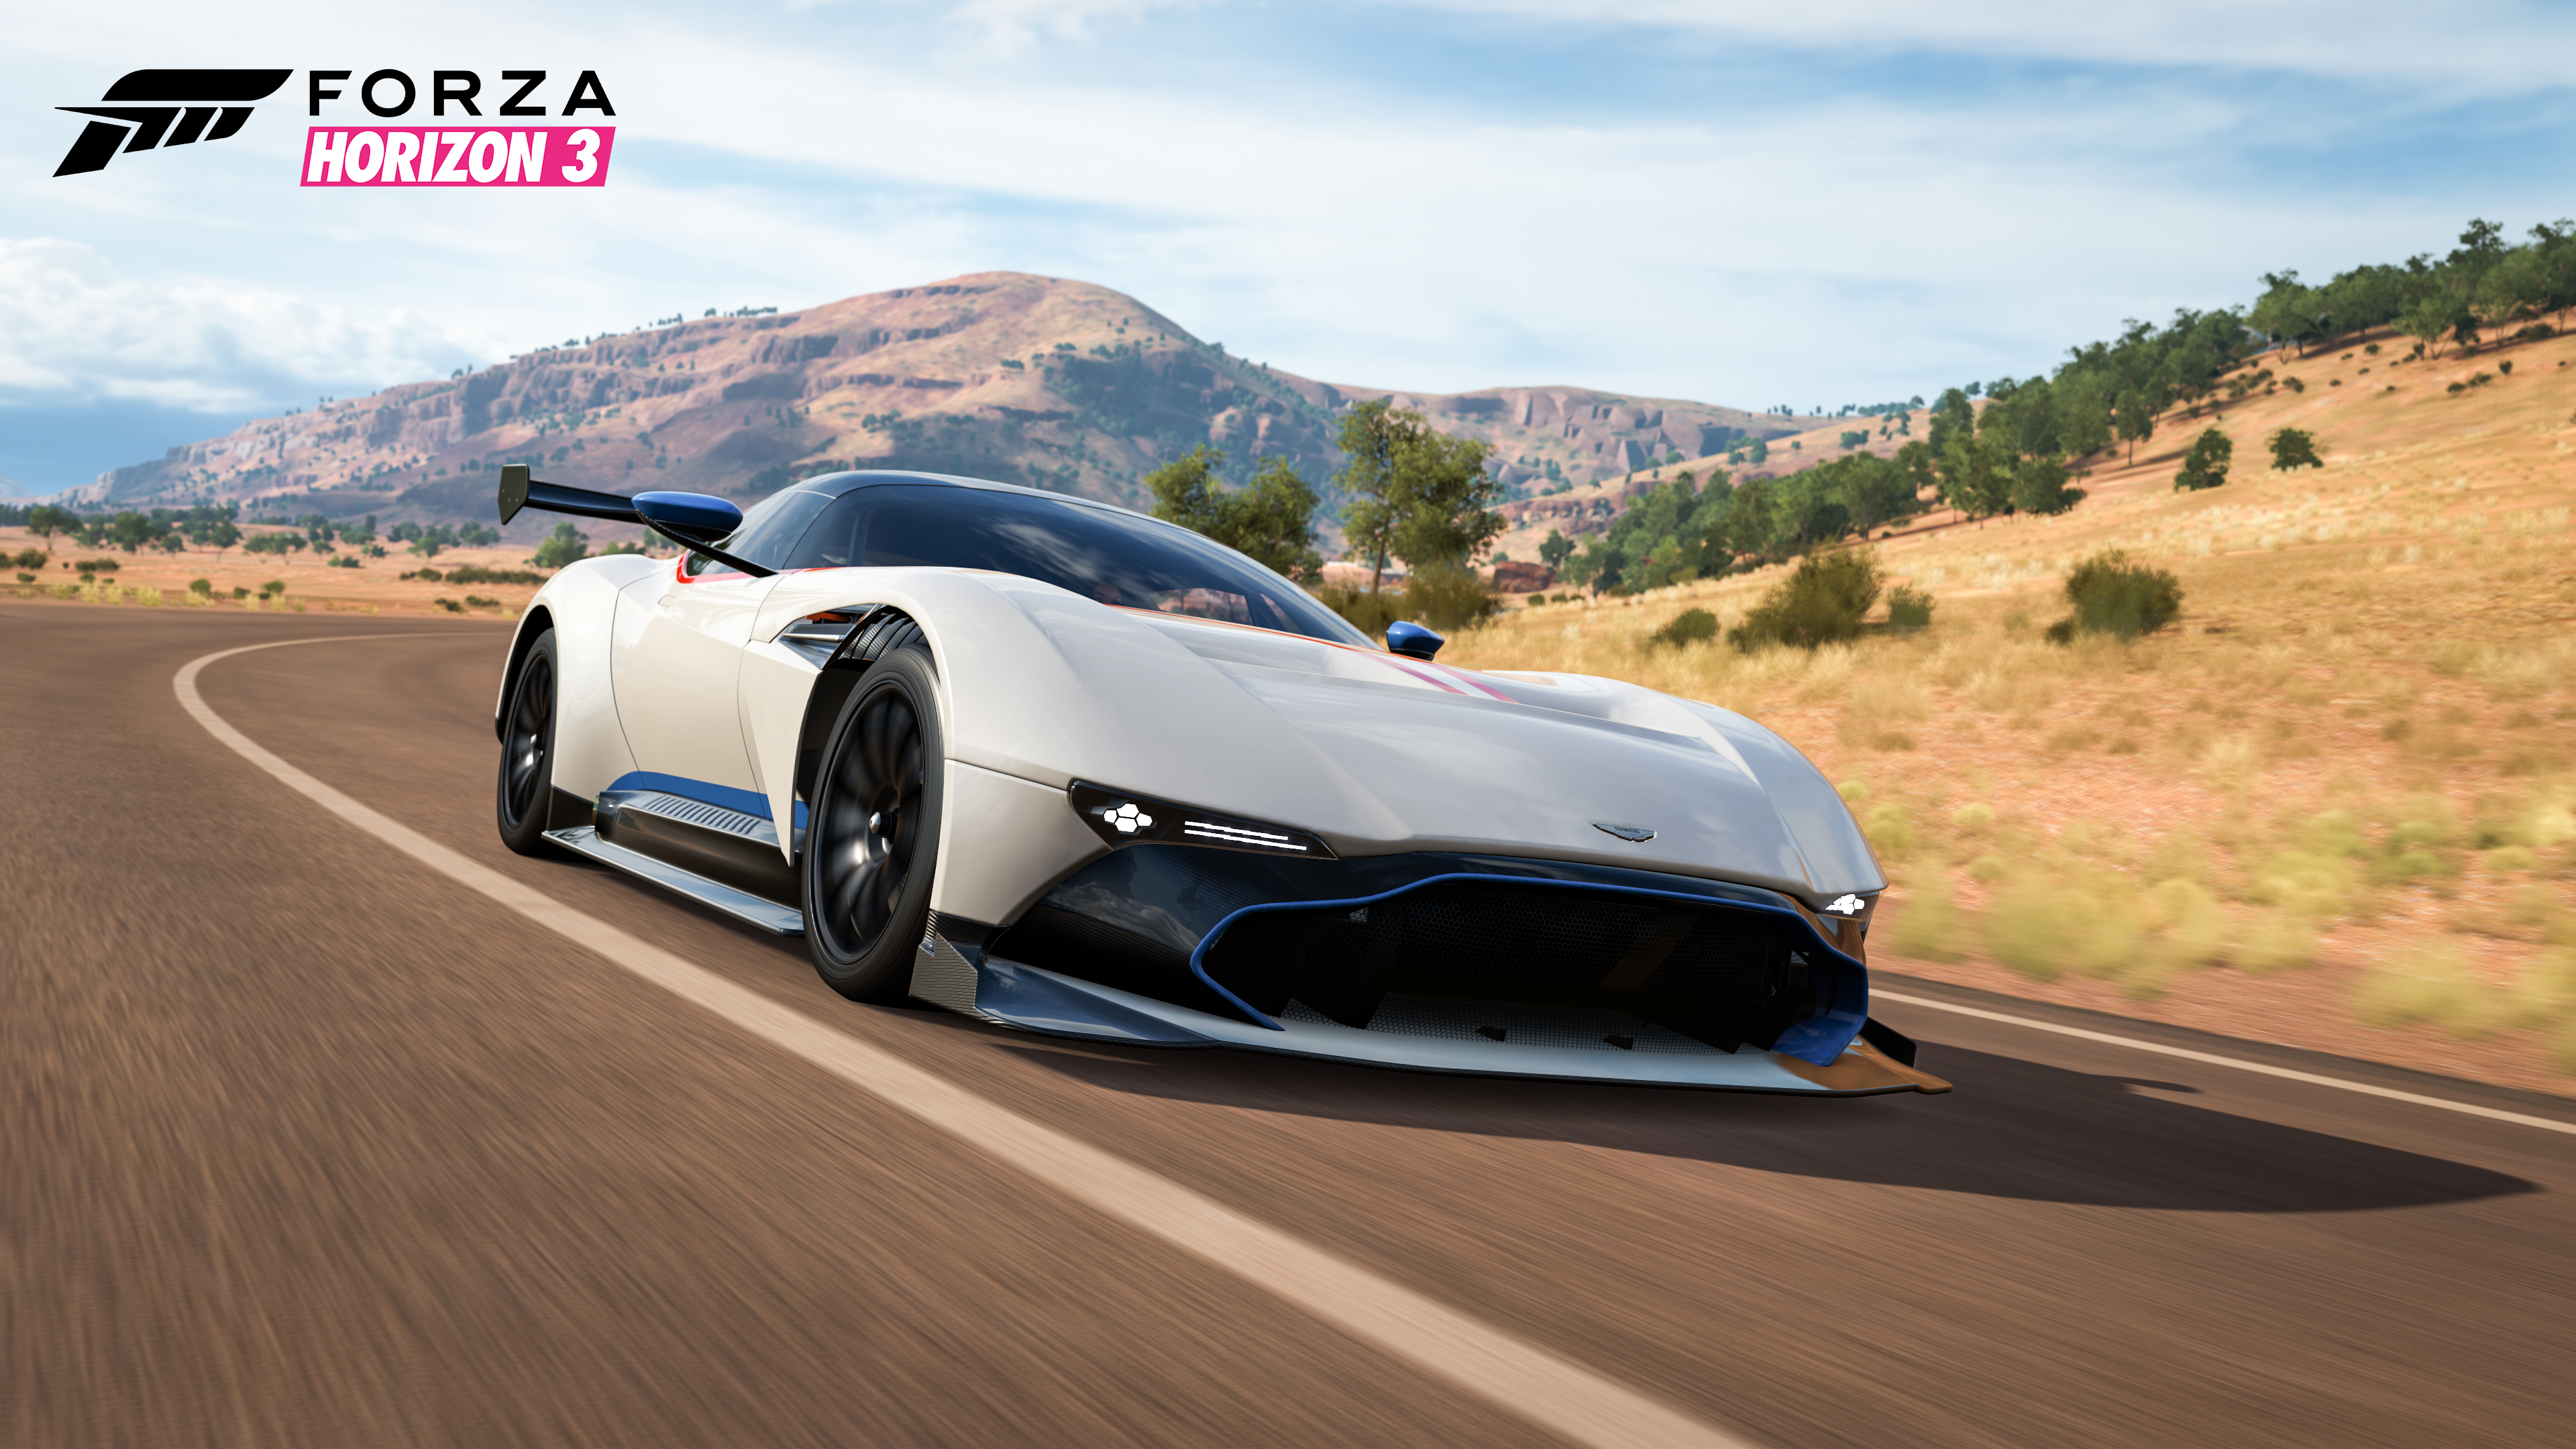 Forza Horizon 3 Backgrounds on Wallpapers Vista